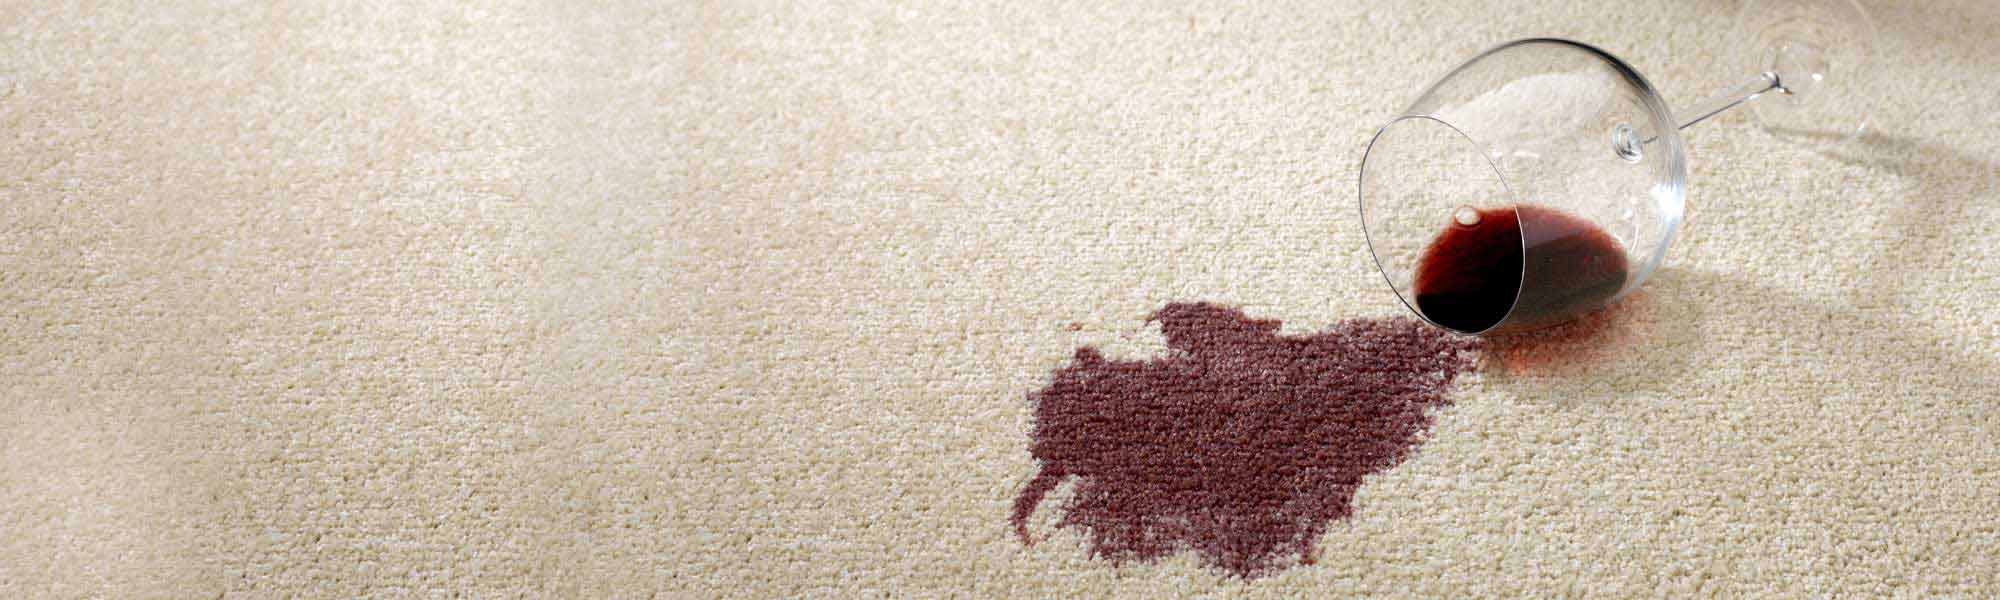 Professional Stain Removal Service by Chem-Dry Classic